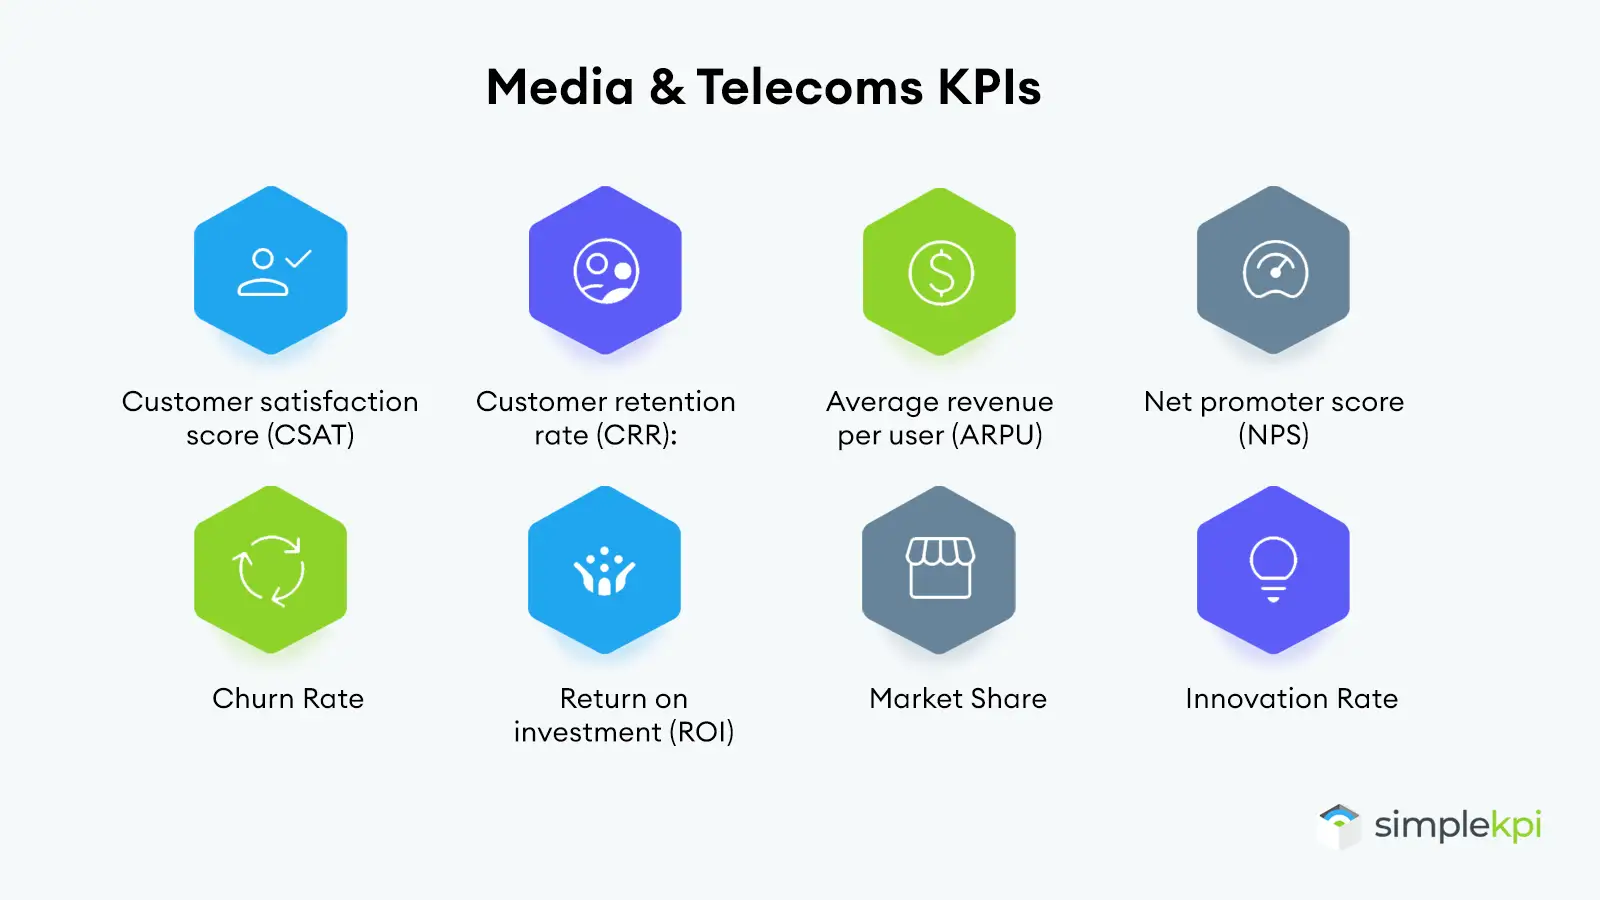 8 Multicoloured Hexagons with white icons, each one representing a different Media and Telecoms KPI